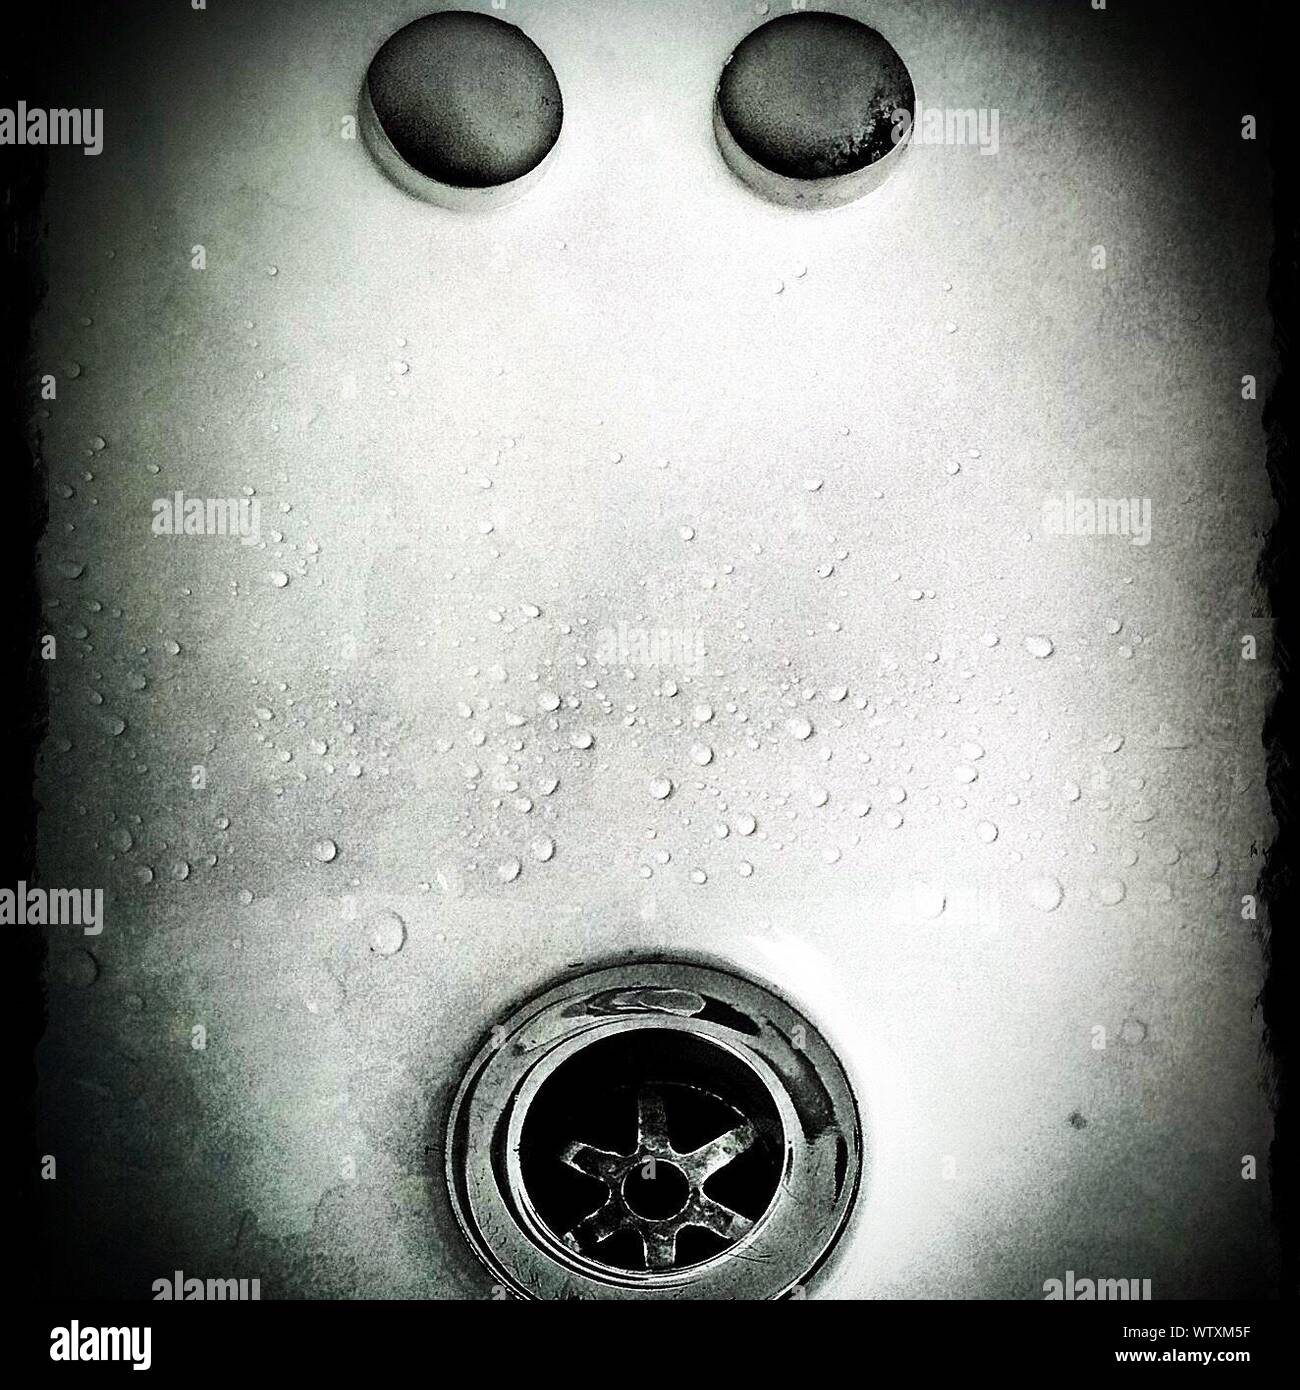 Close-up View Of Plughole Of Sink With Two Overflow Holes Stock Photo